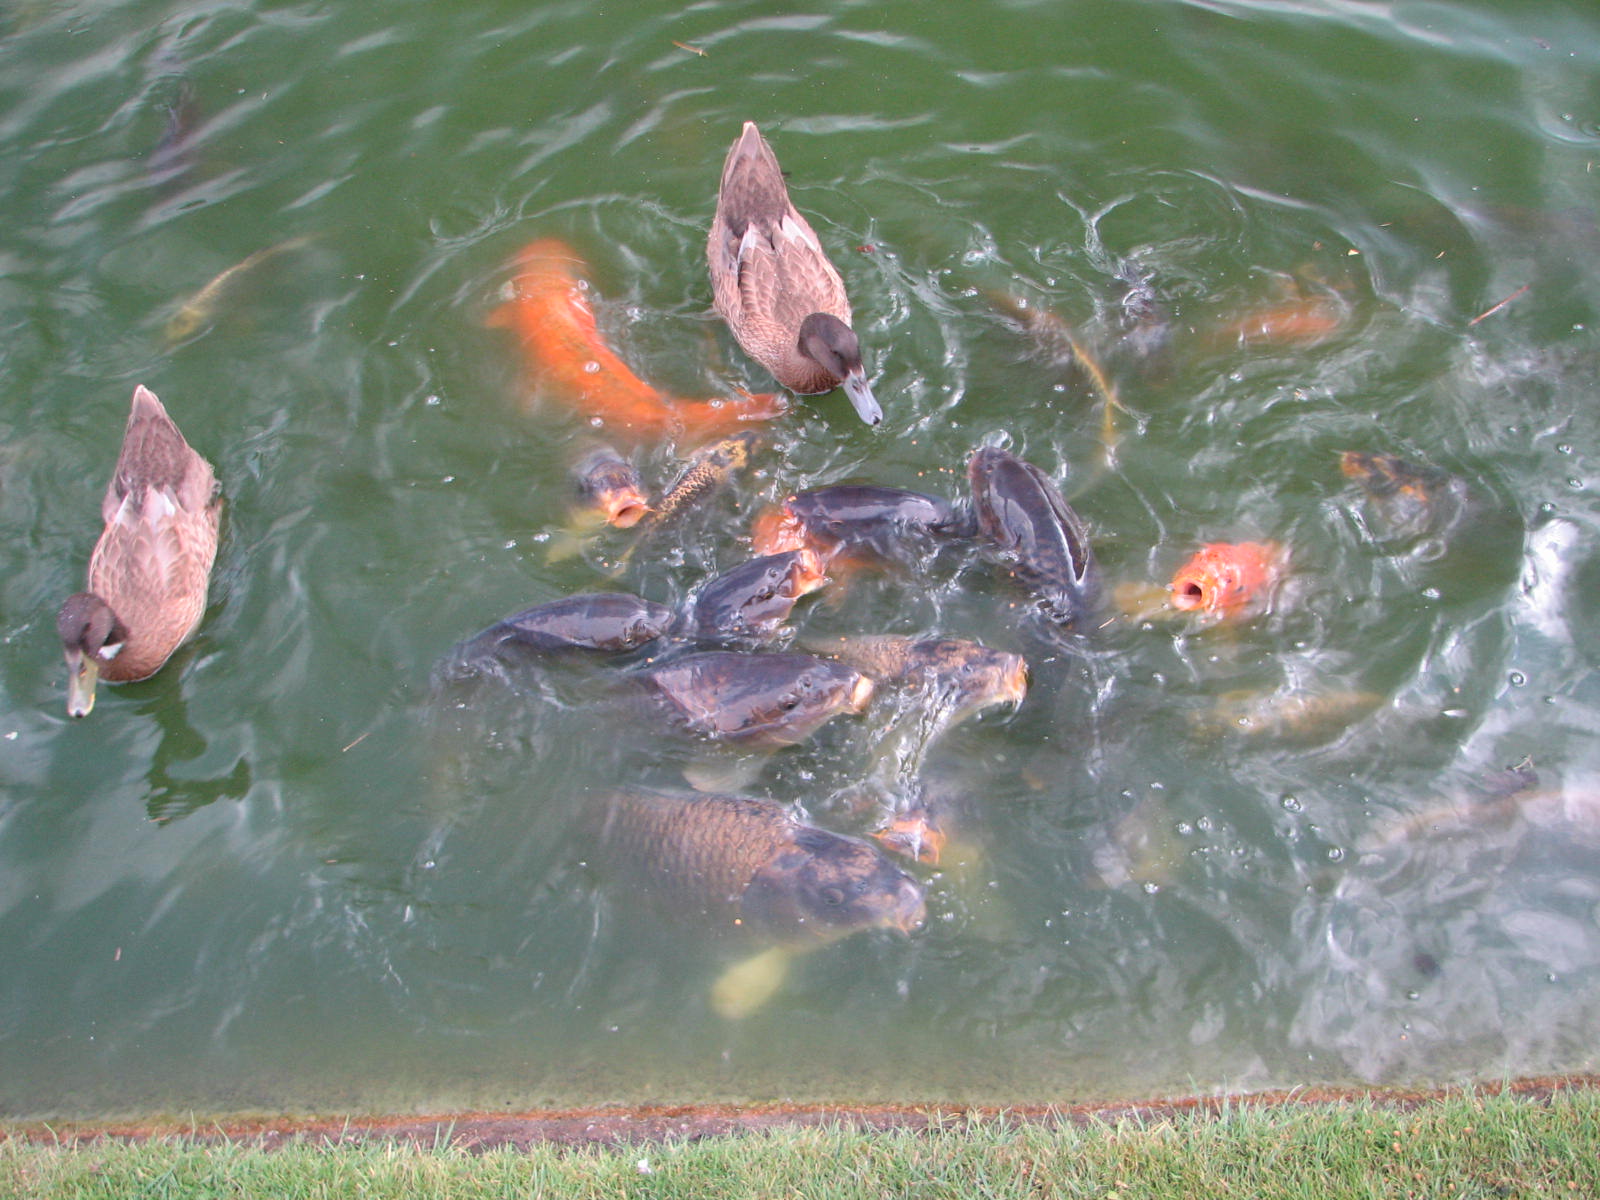 Ducks competing with fish photo